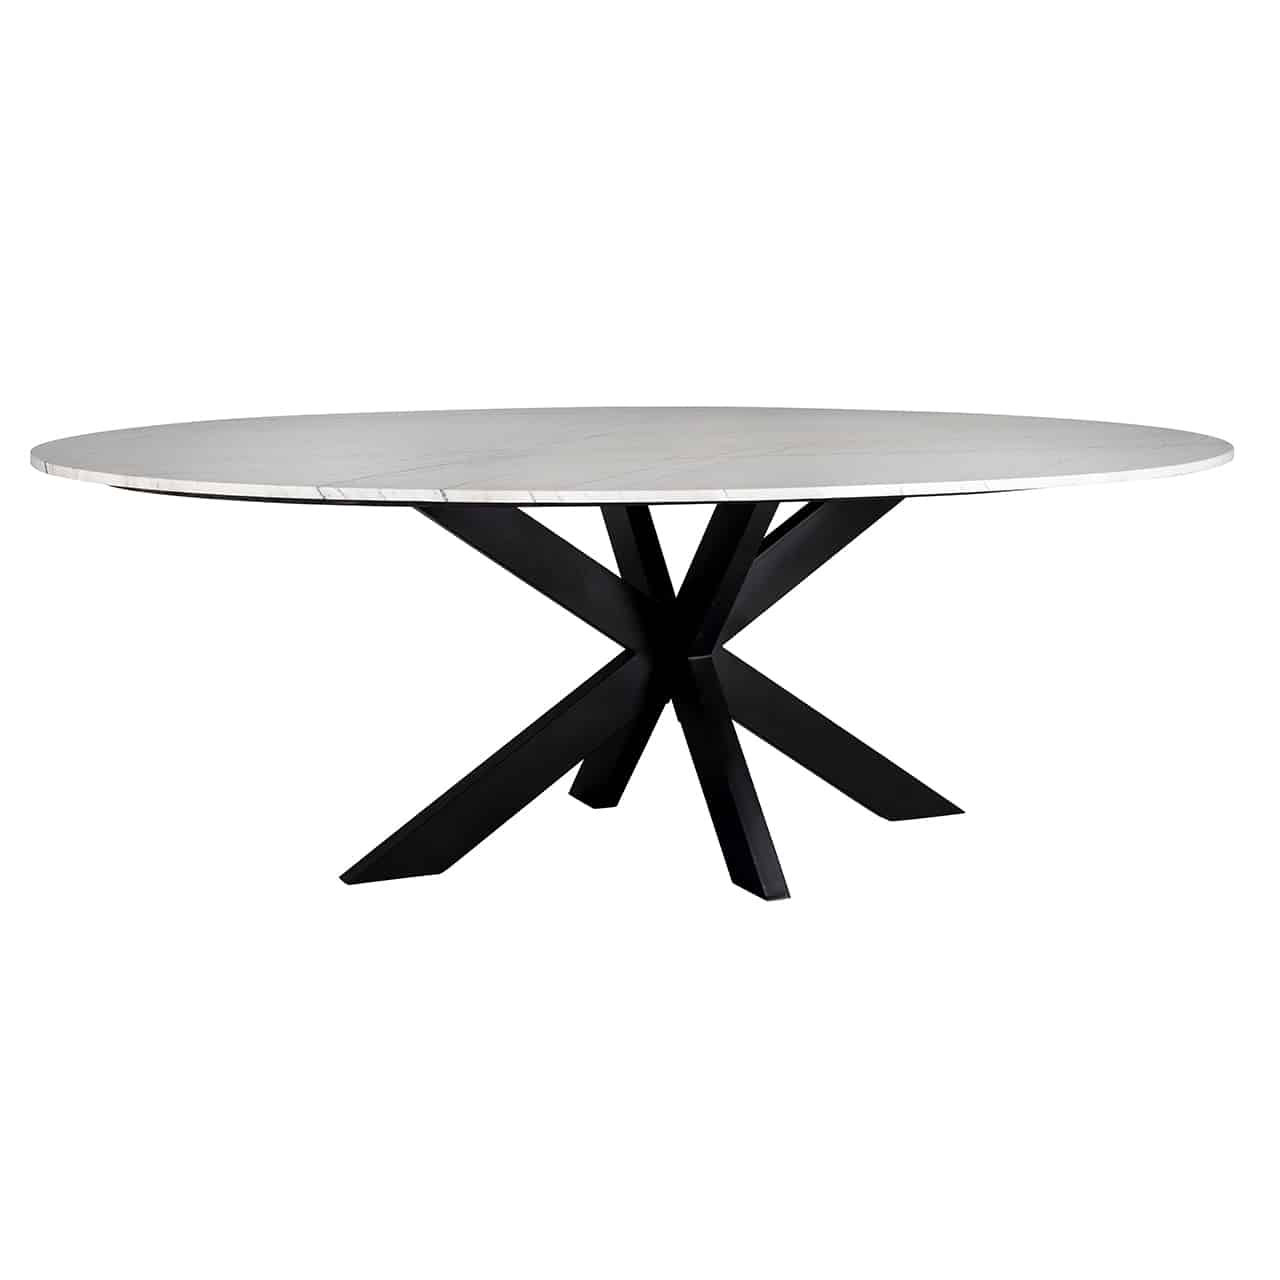 Lexi White Marble 2.3m Dining Table